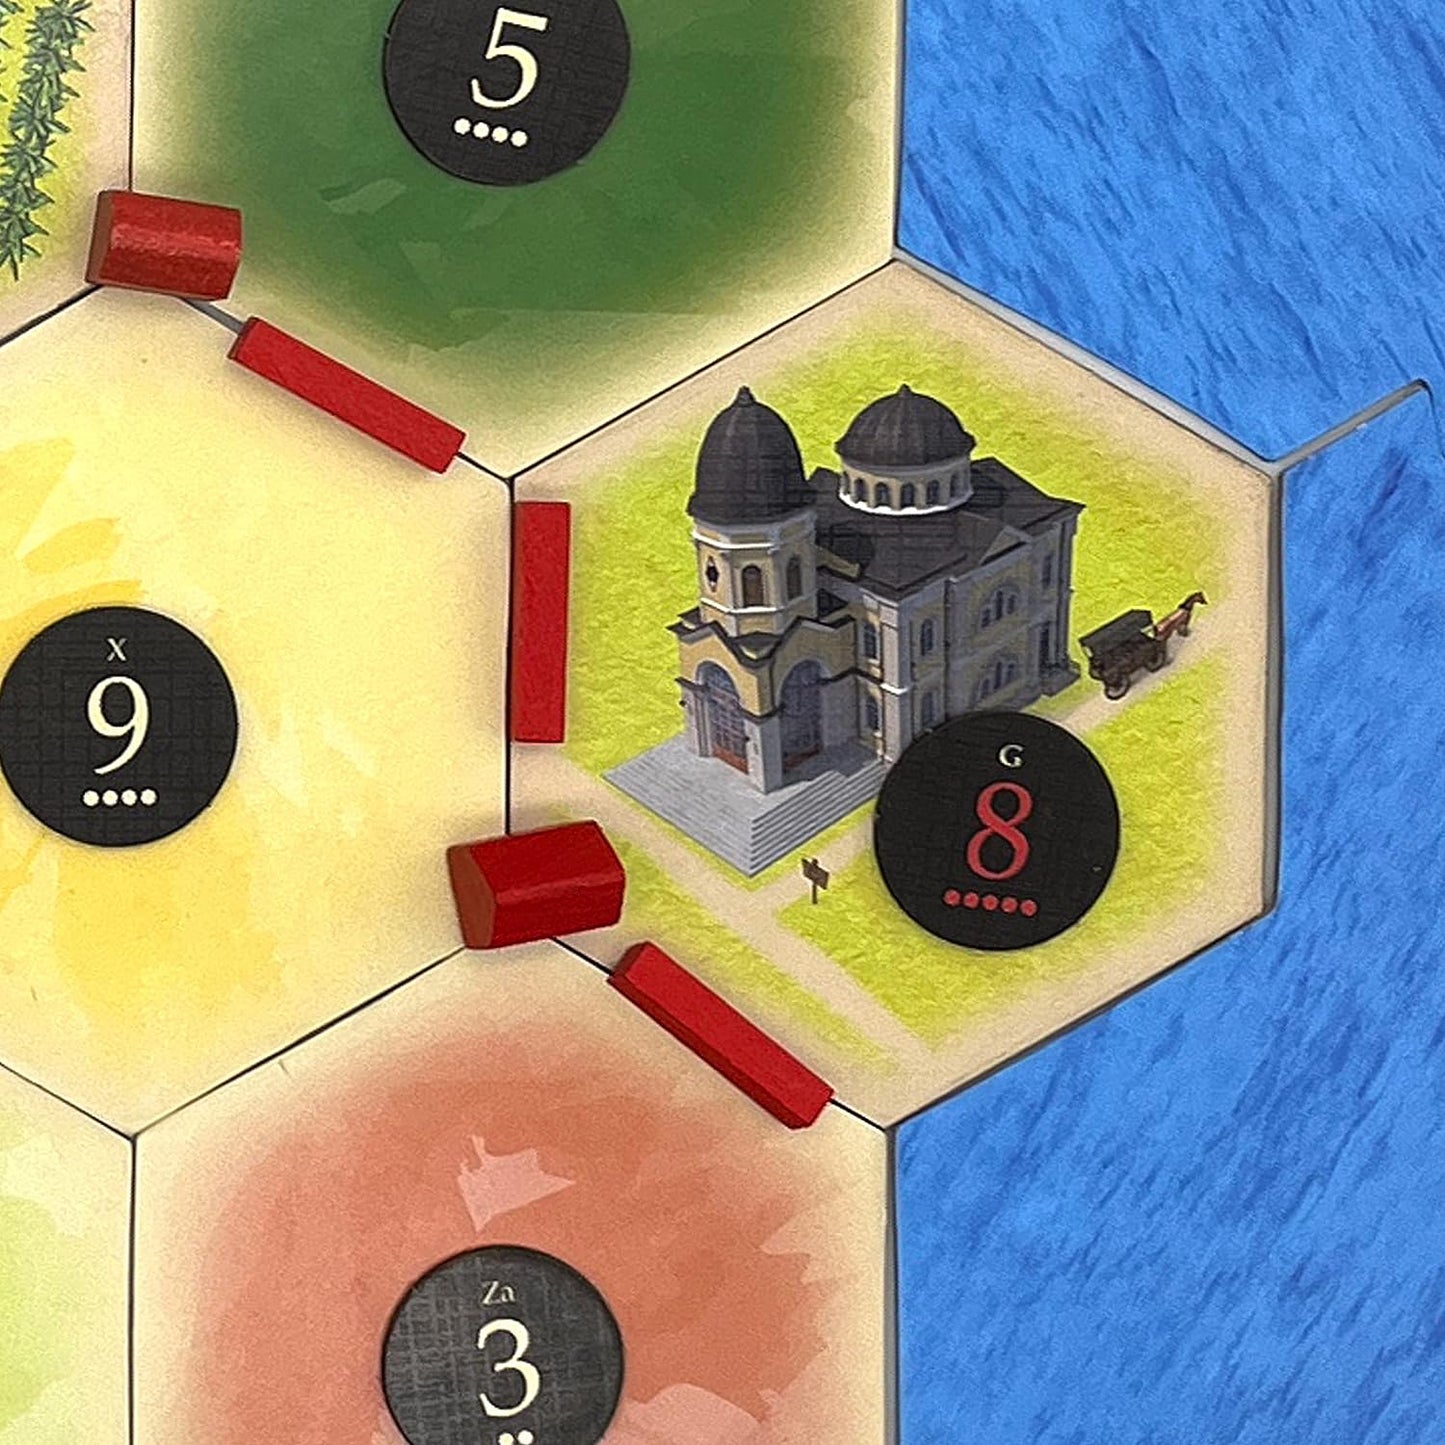 Triple Hex Pack - Wizard's Castle, Thieves' Guild and Plantation Scenarios compatible with Catan's Settlers of Catan